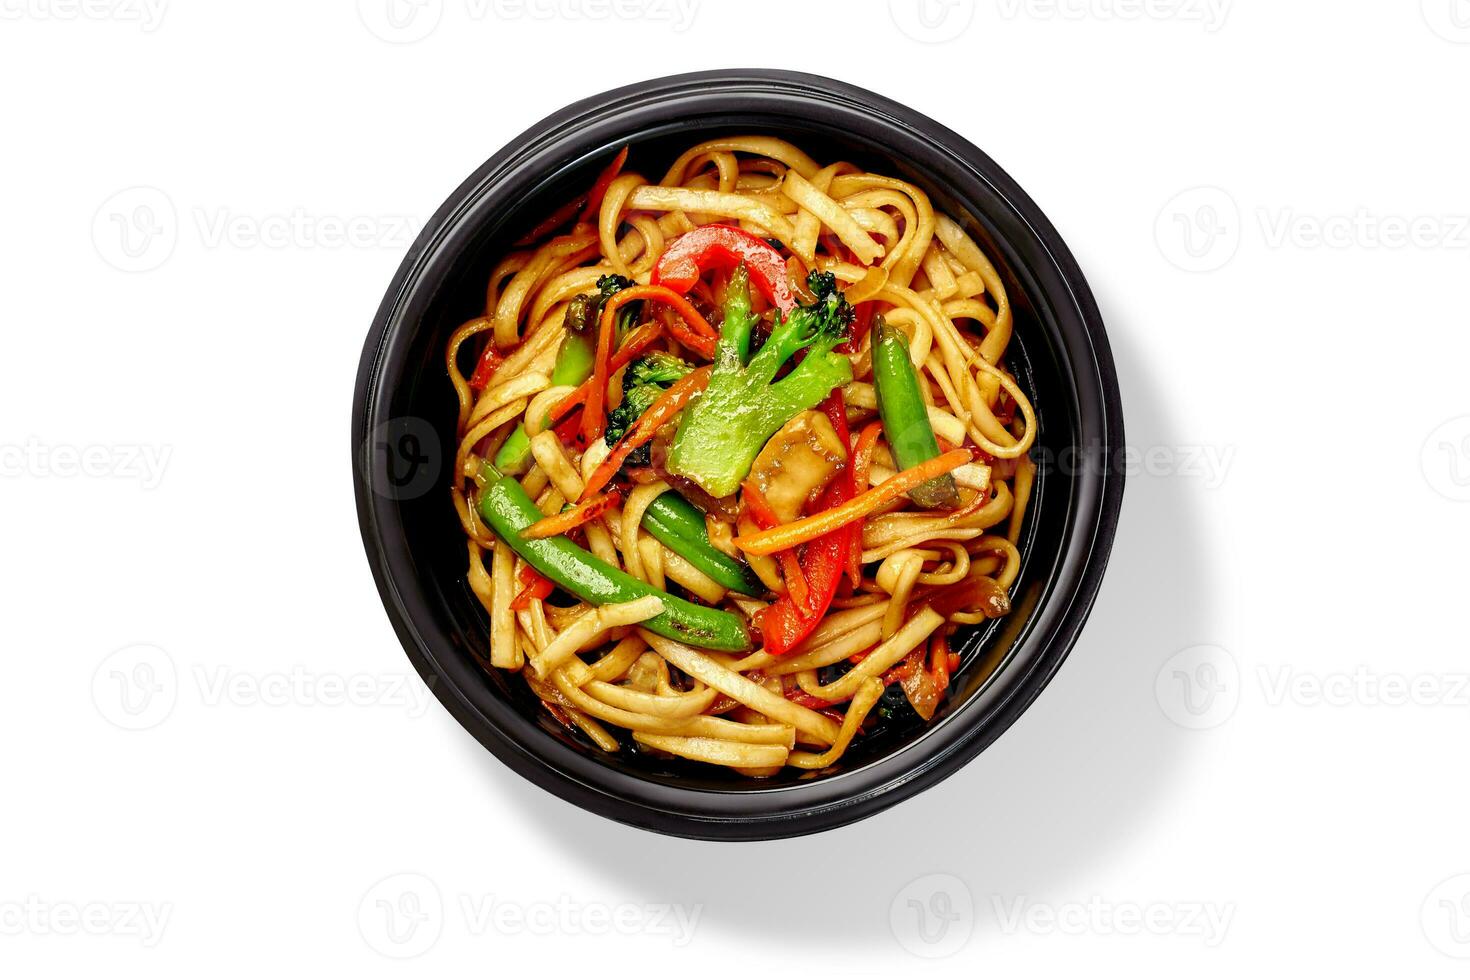 Stir fried udon wheat noodles with broccoli, bell pepper, green beans and mushrooms photo